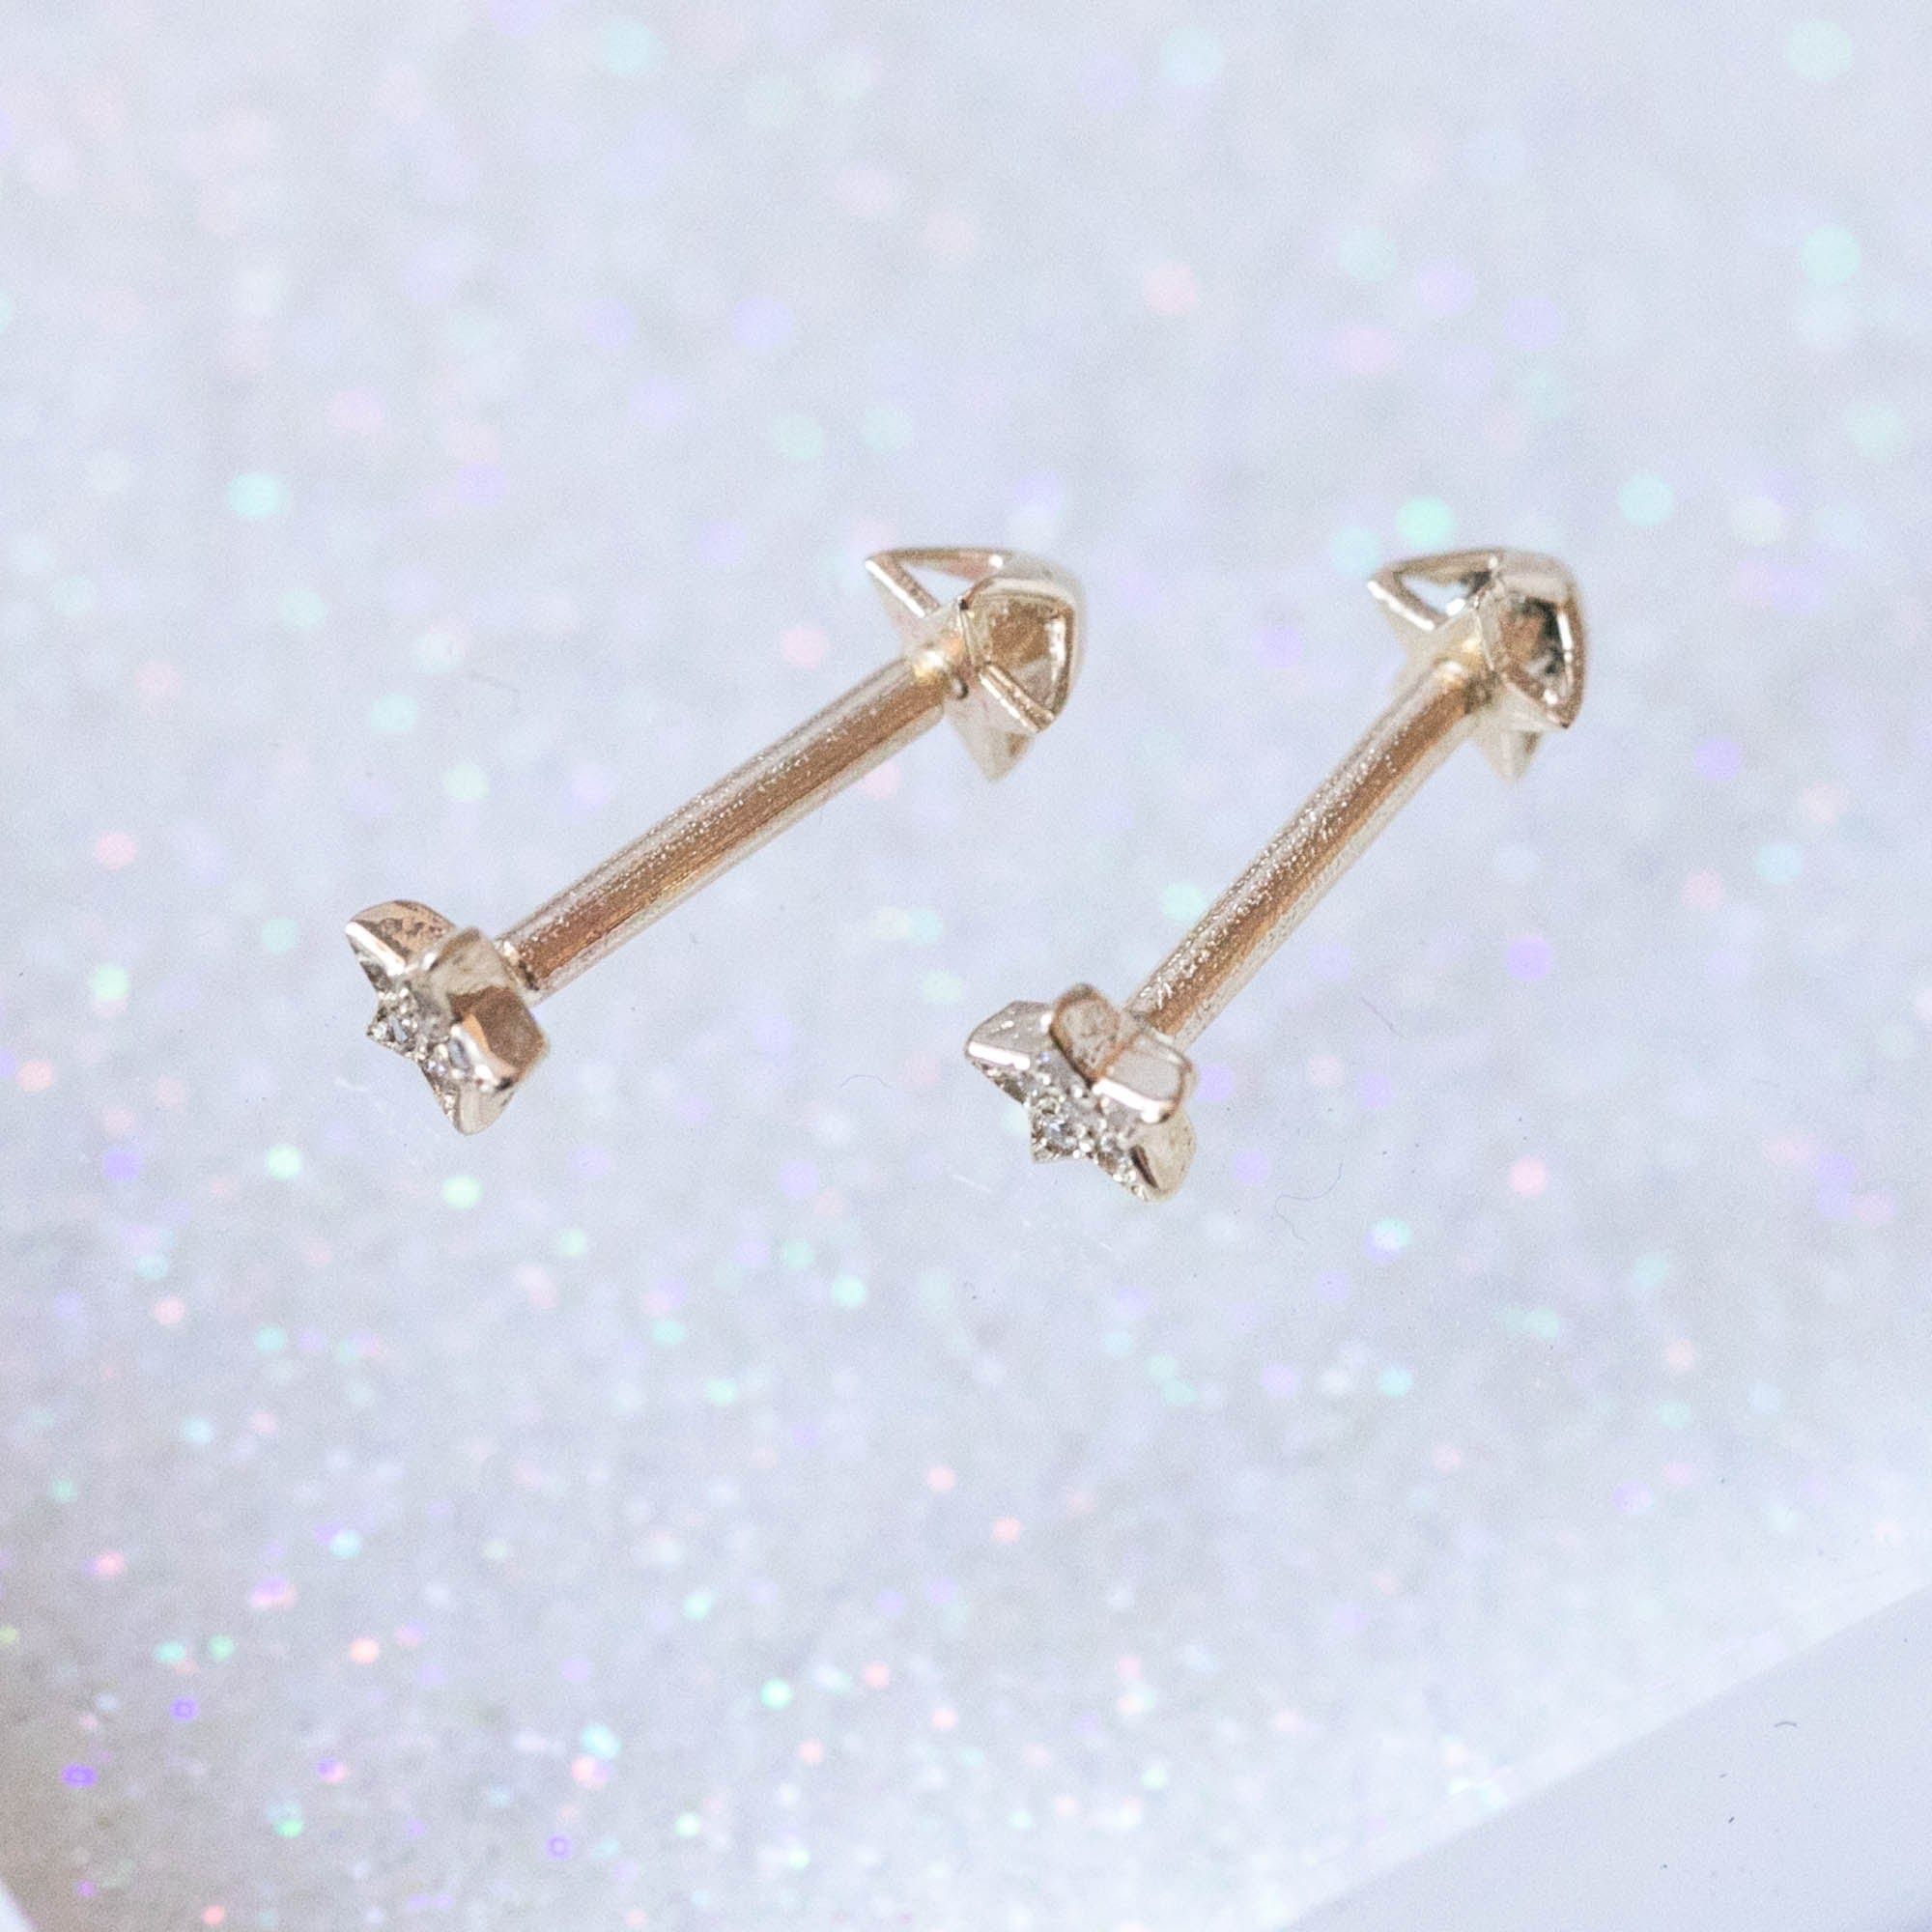 Twilight London Barbell Earring Gold 14K Solid Gold Star Barbell